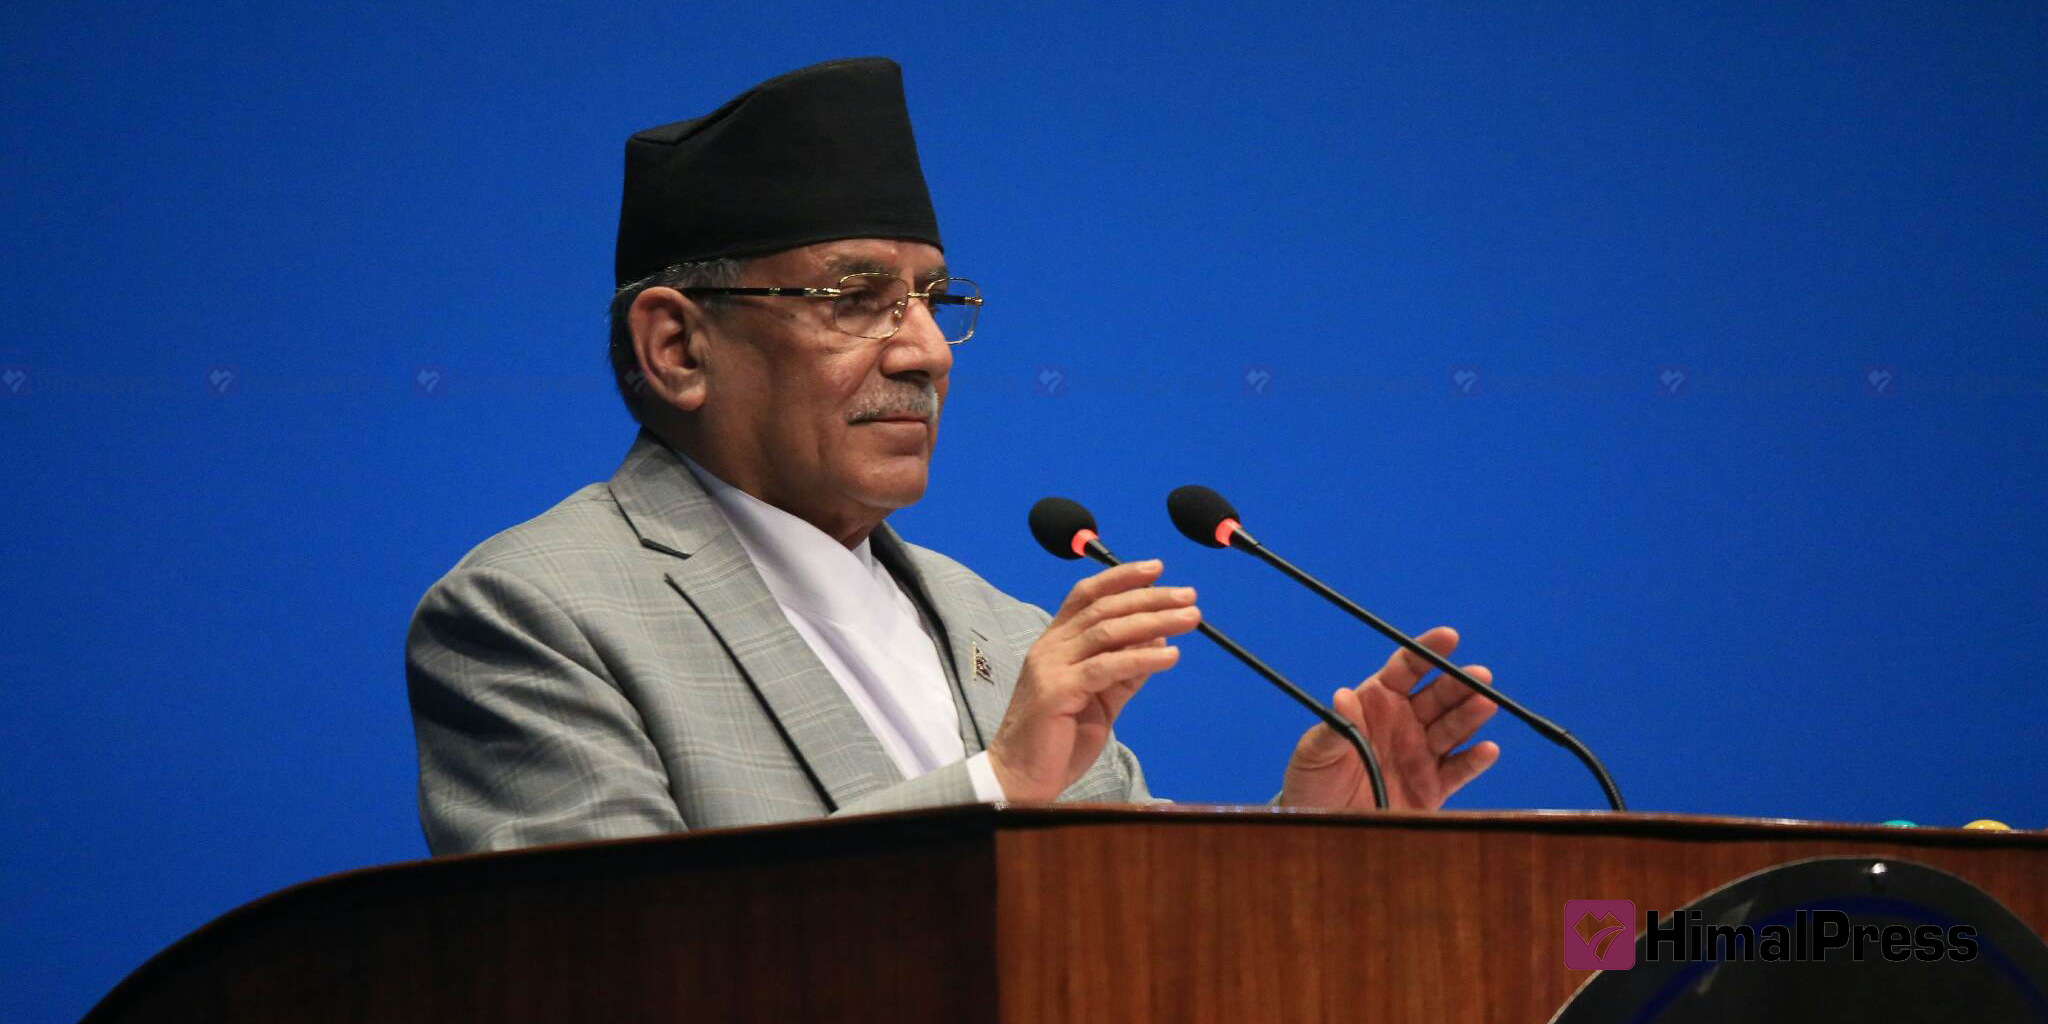 I have requested Modi to resolve border issues through bilateral mechanism: Dahal